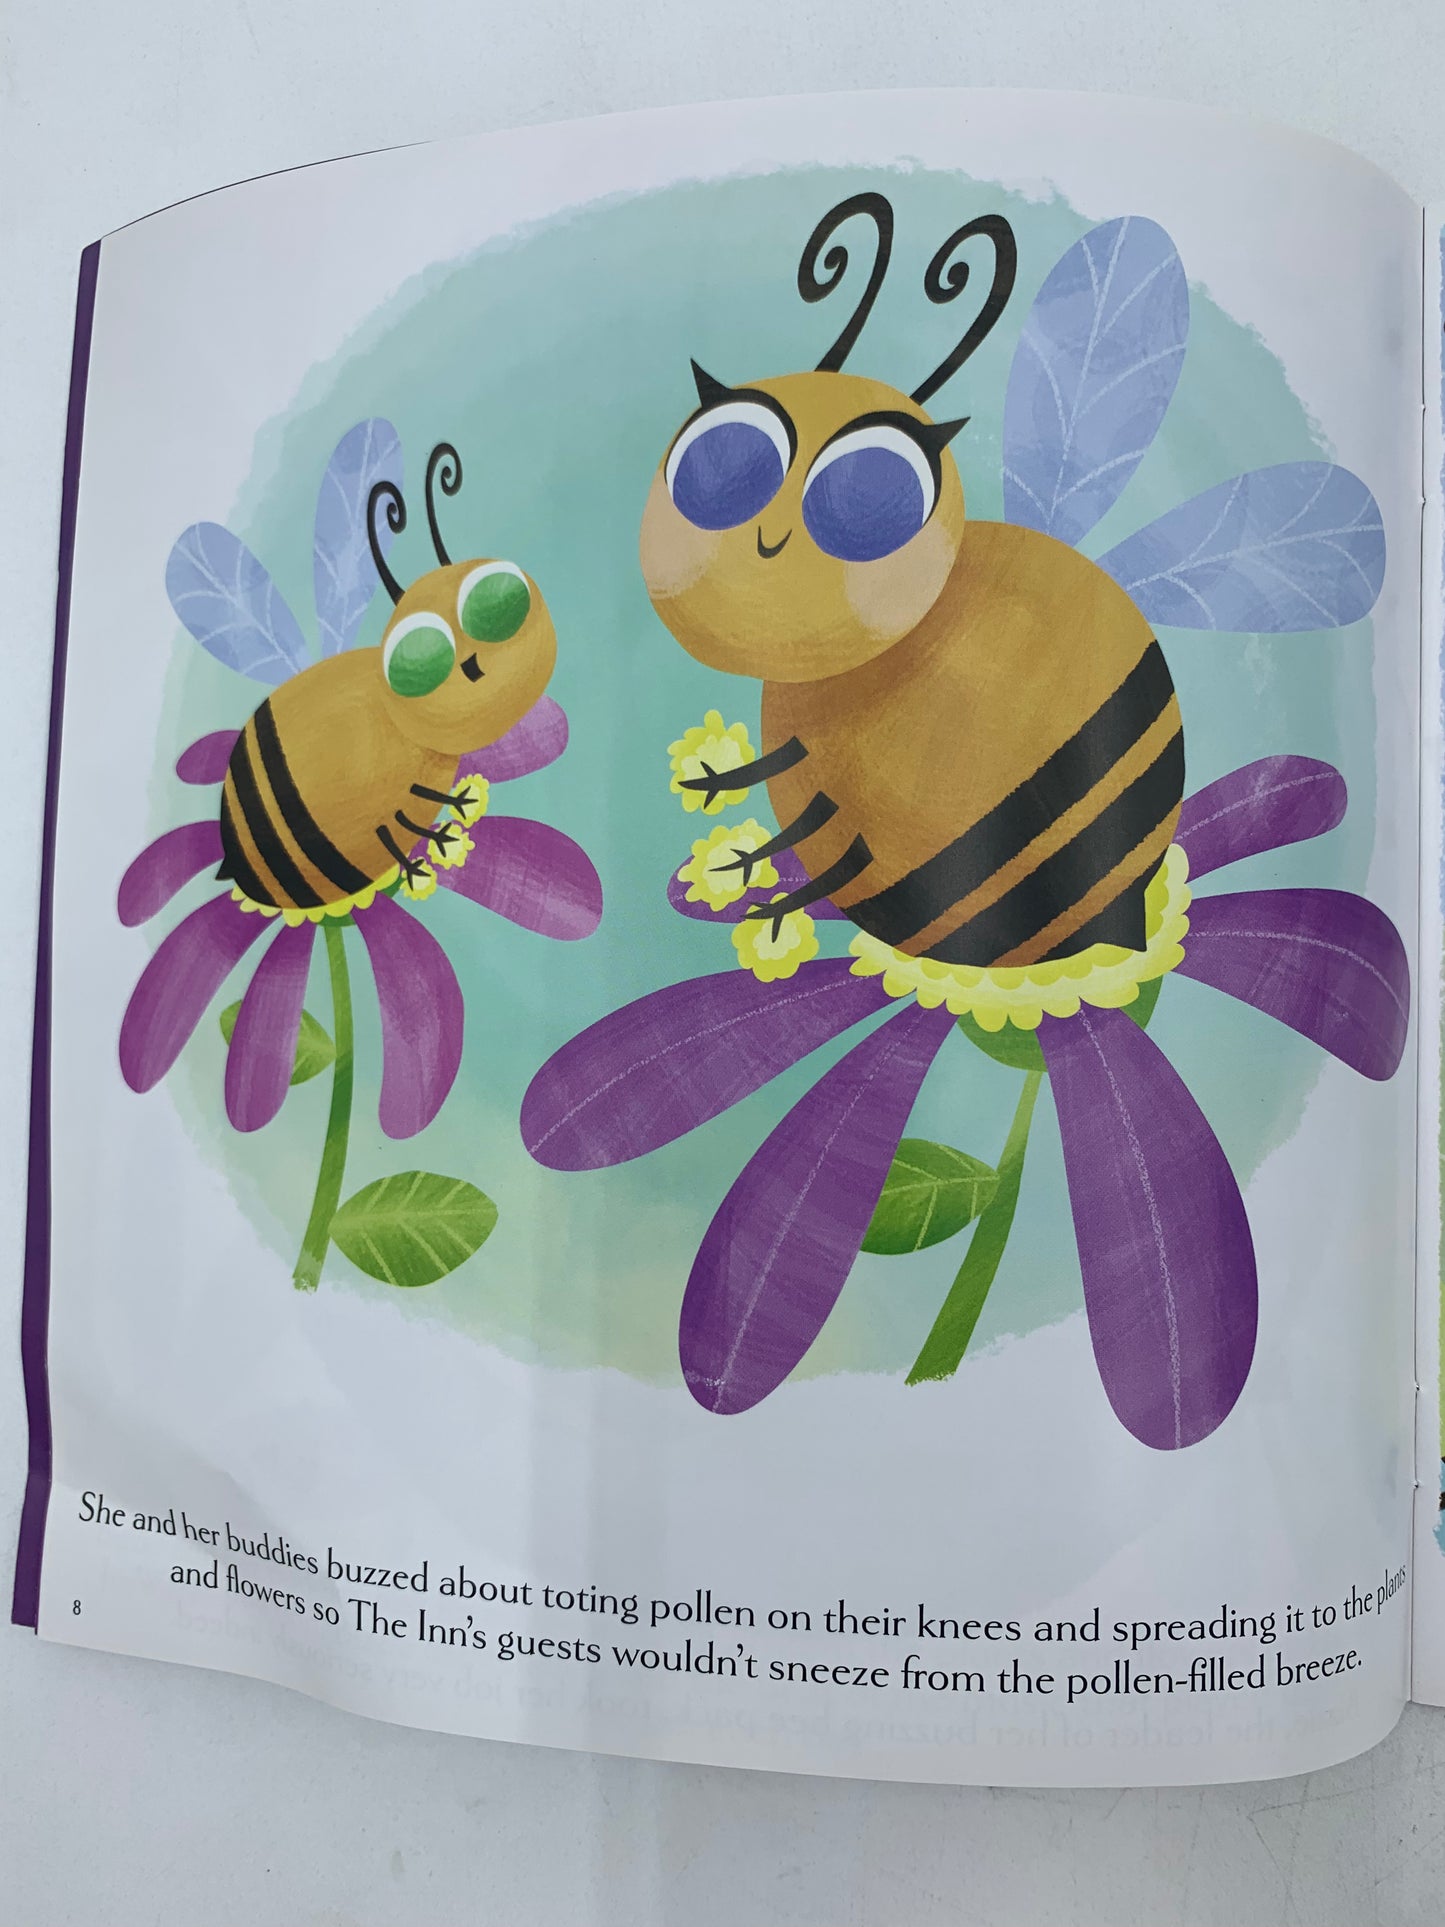 Book, "Bizzie, the Beat-Loving, Bumbling Bee"